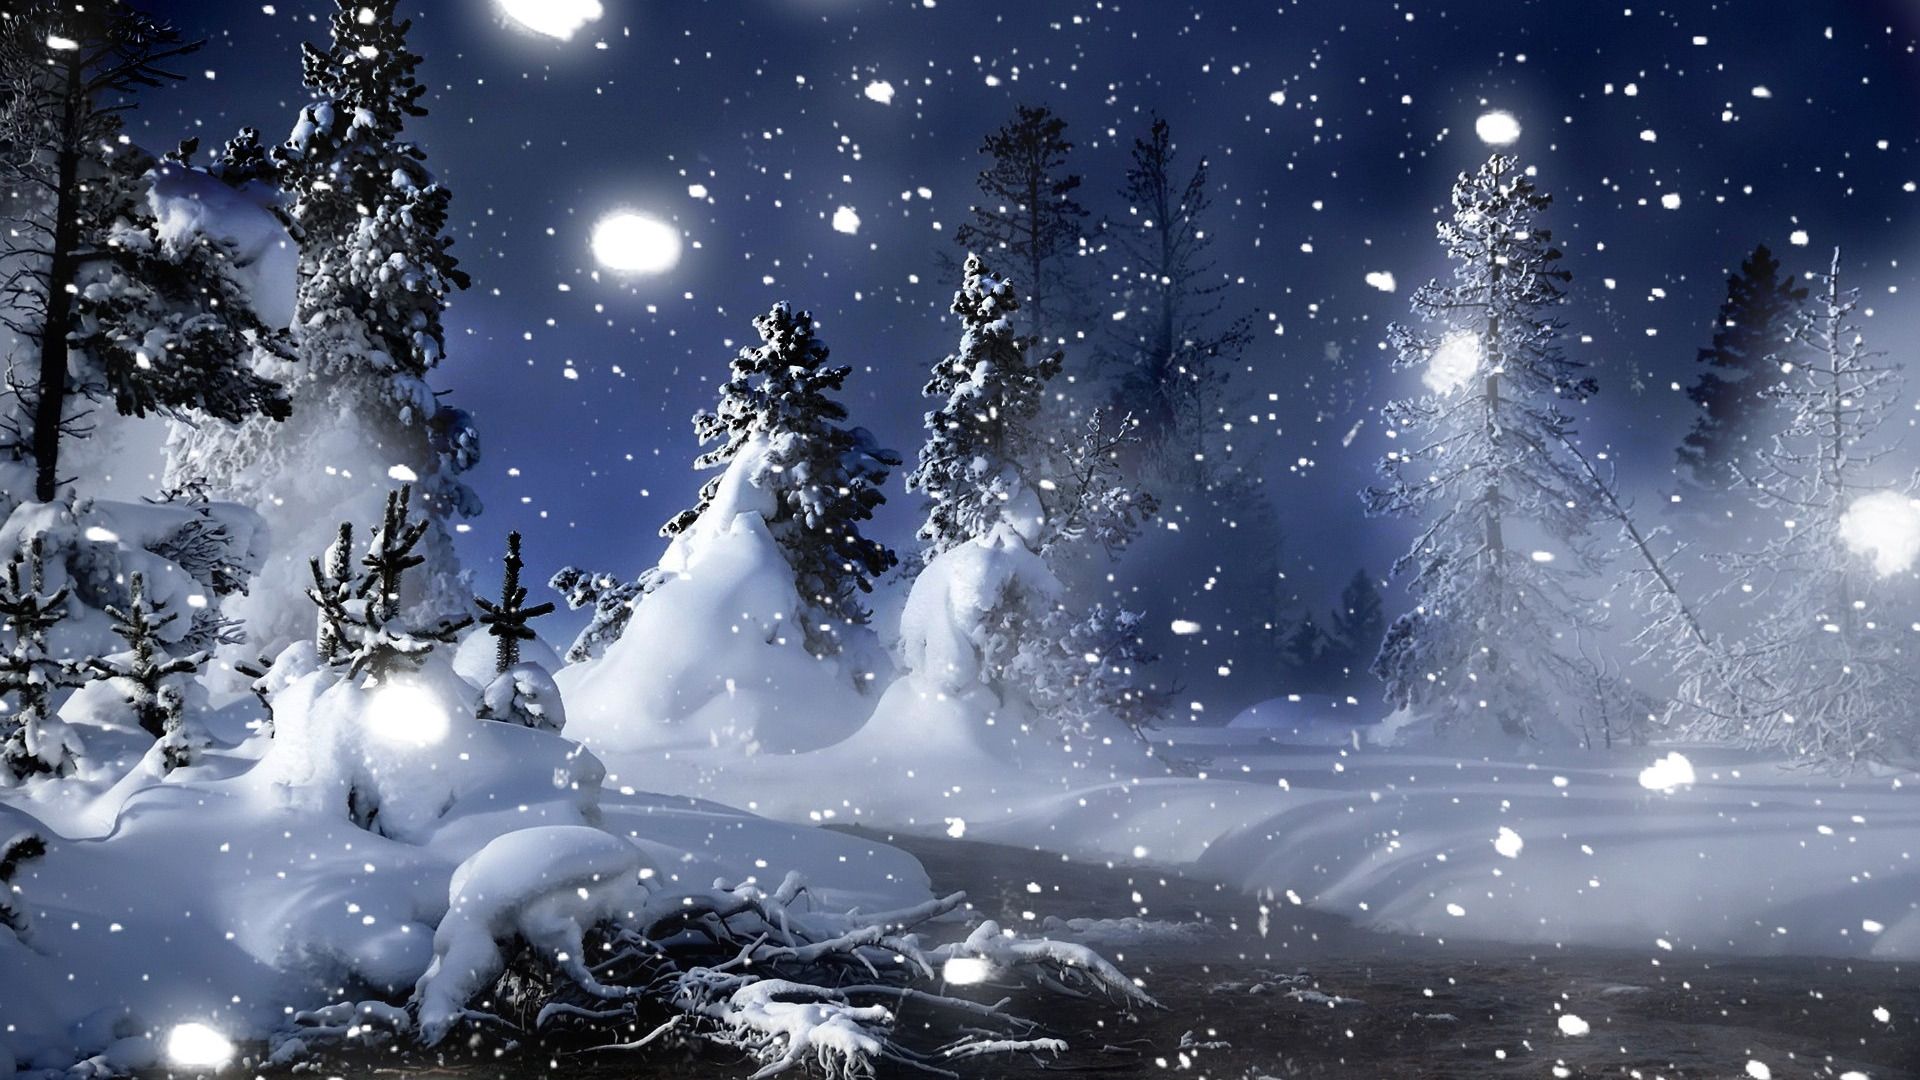 Winter Snow Wallpaper High Definition Quality